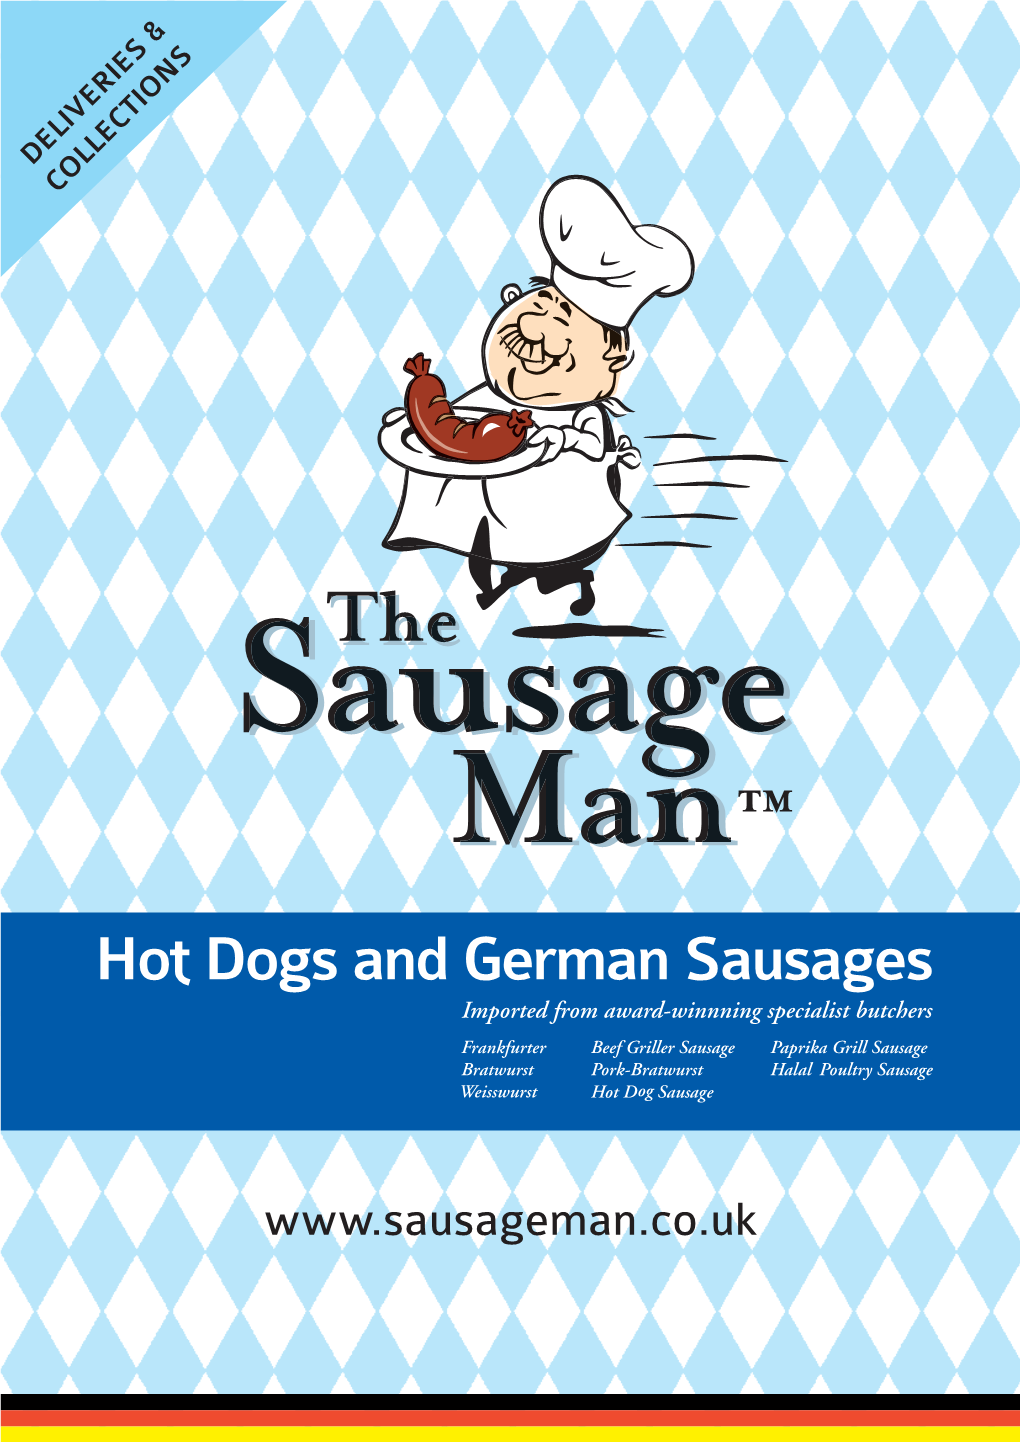 Hot Dogs and German Sausages